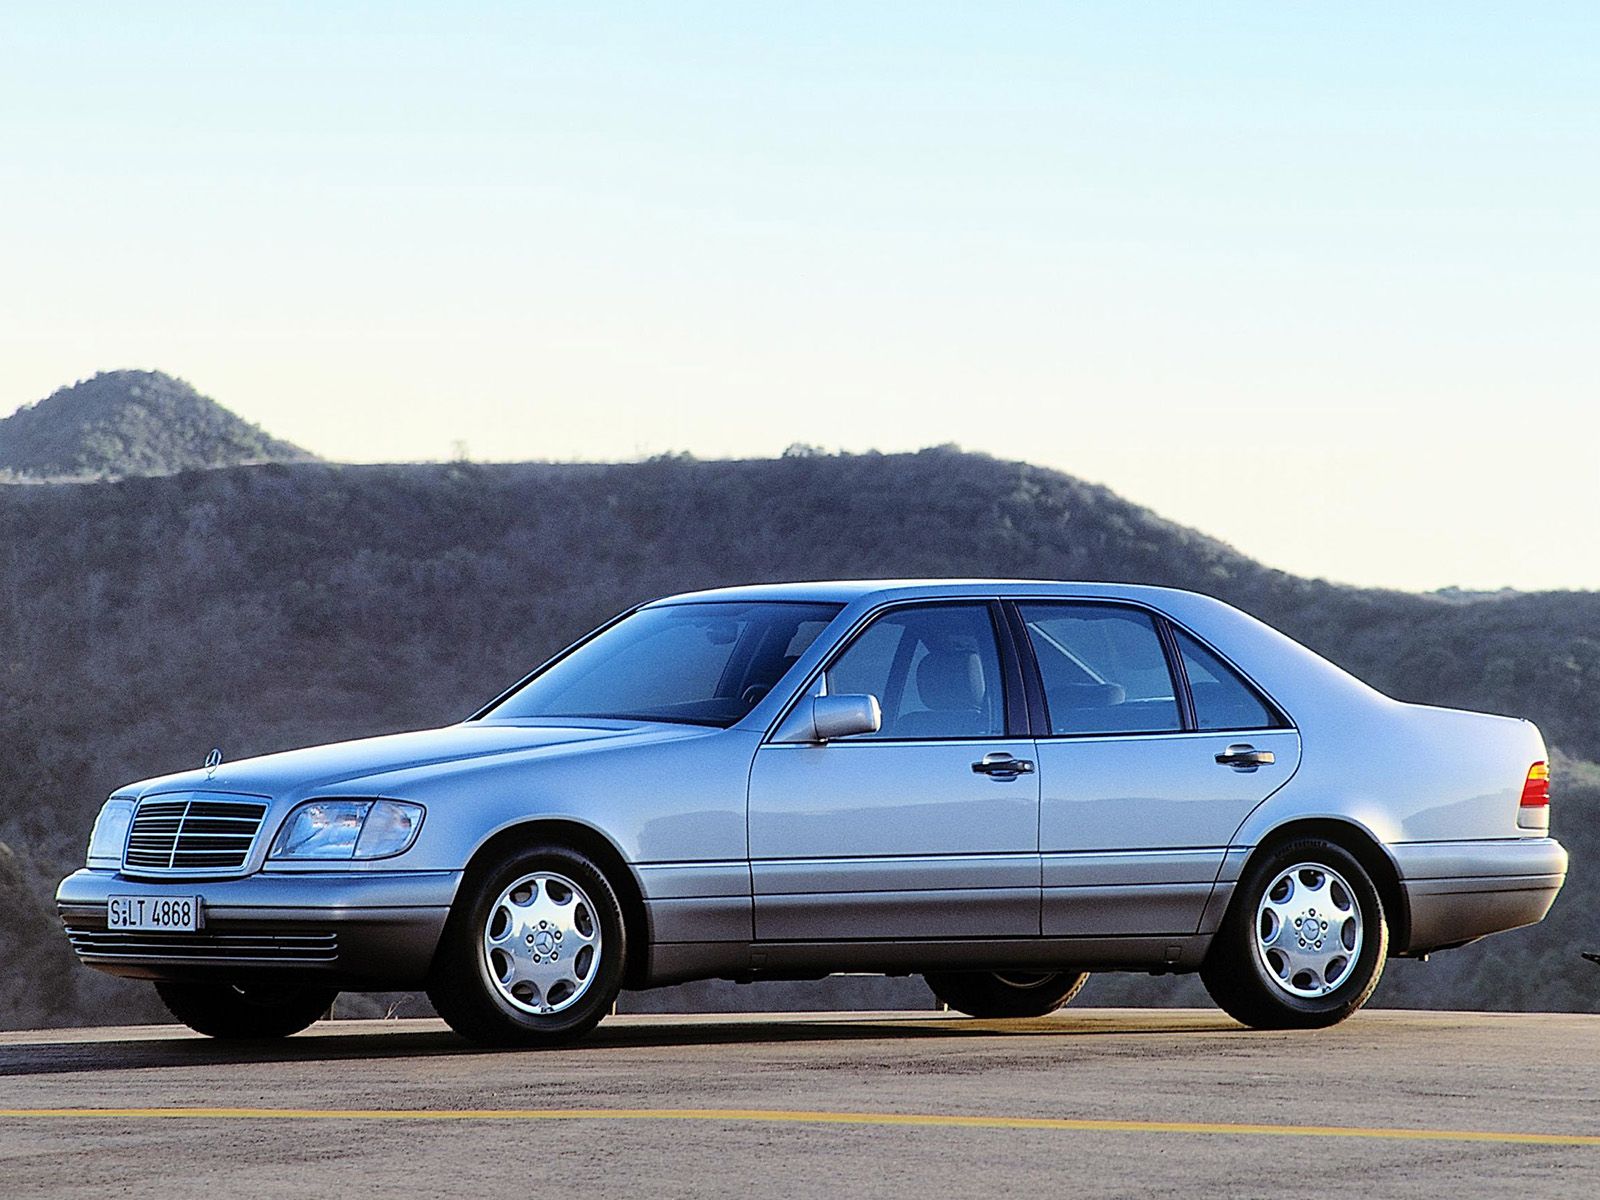 Mercedes Benz S Class W140 Picture. Mercedes Benz Photo Gallery